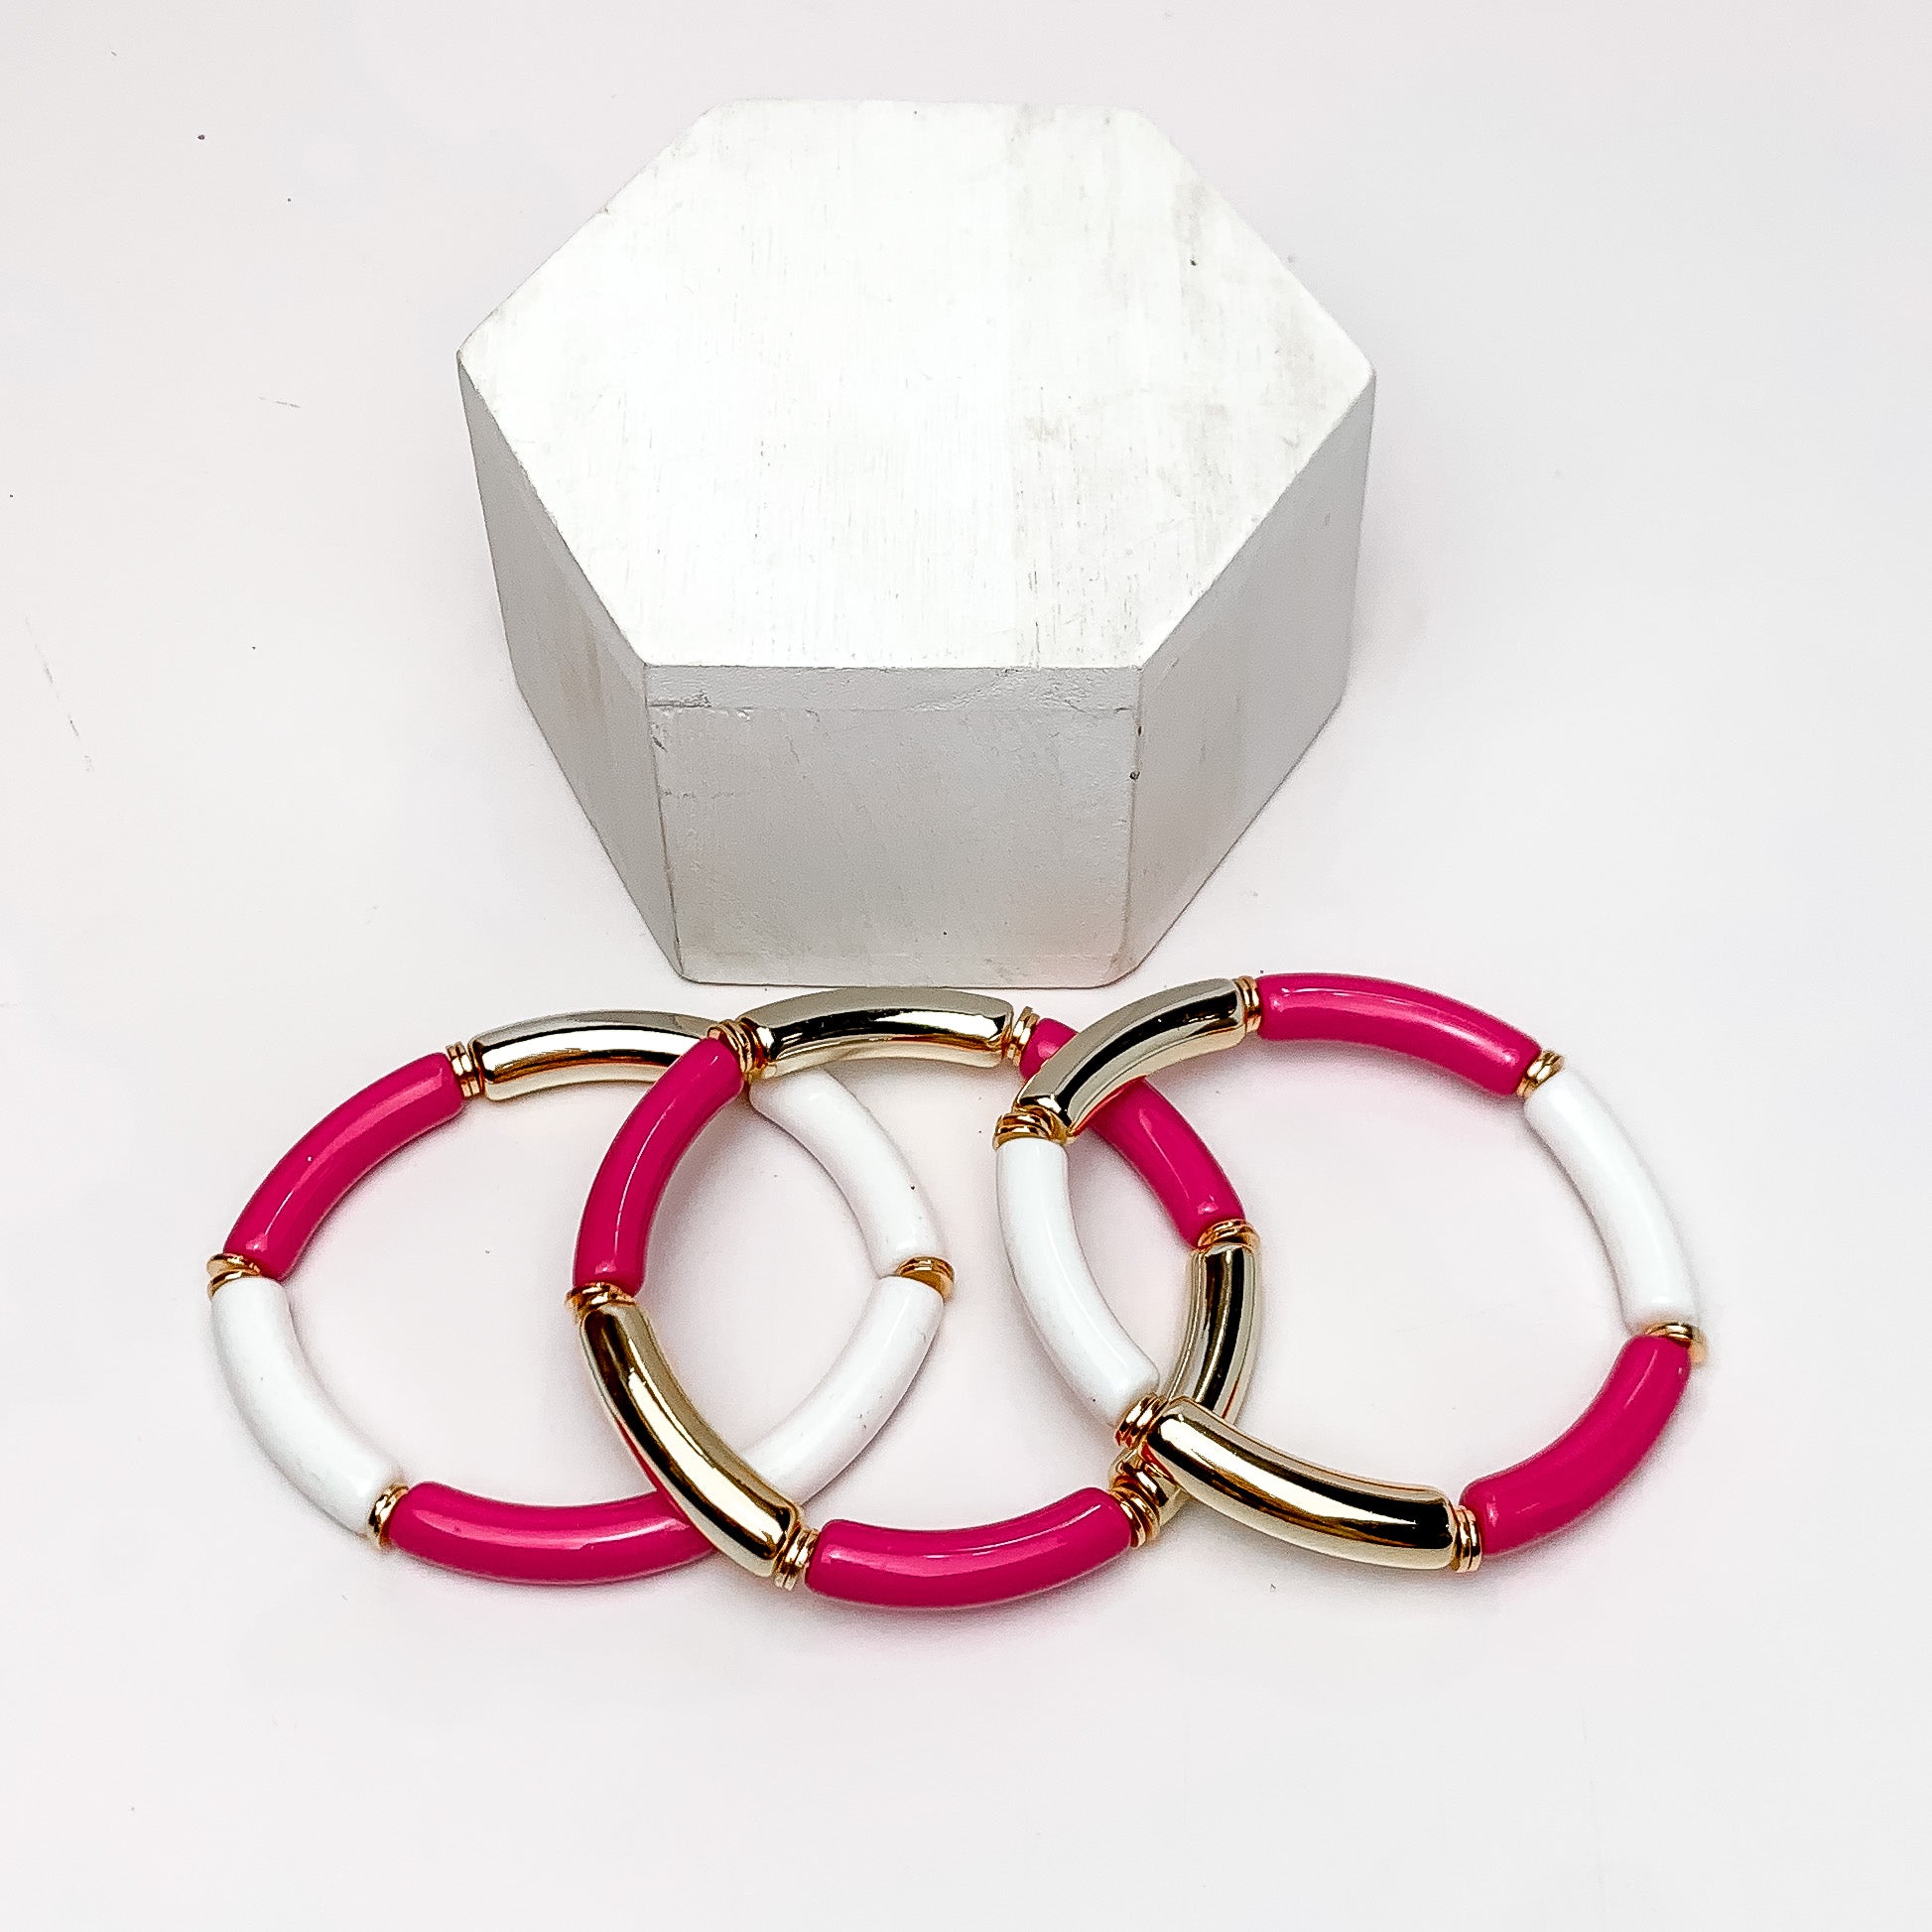 Set of Three | Thin Tube Bracelets in Hot Pink, White, And Gold Tone - Giddy Up Glamour Boutique